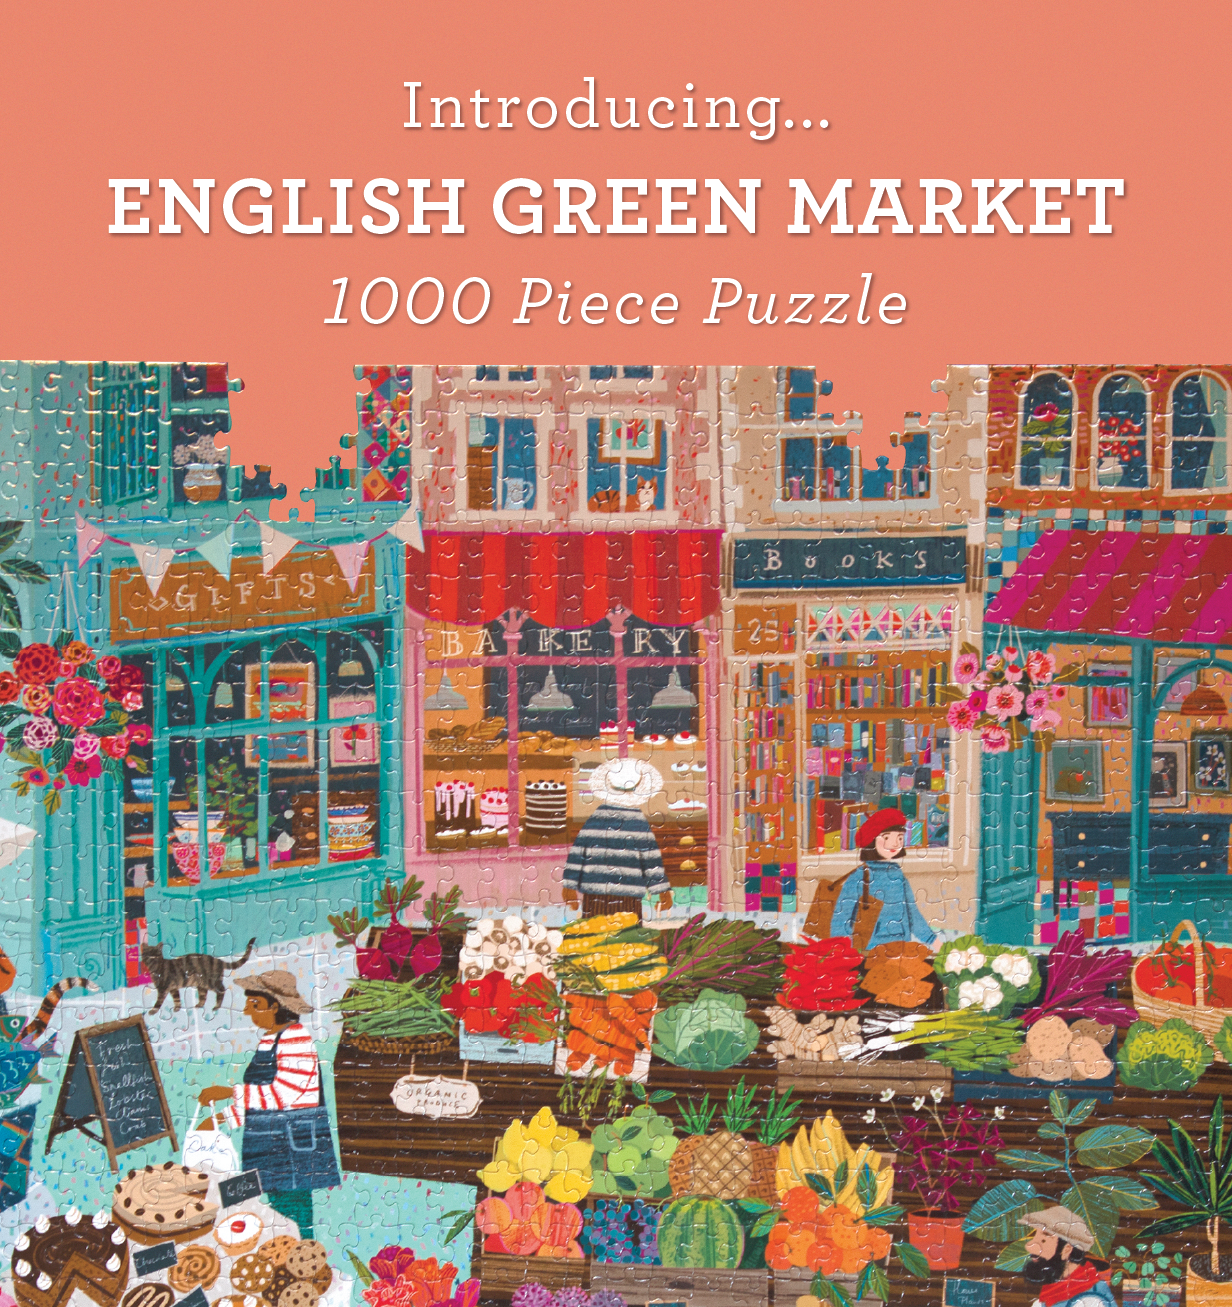 Introducing New_English_Green_Market 1000 Piece Puzzle